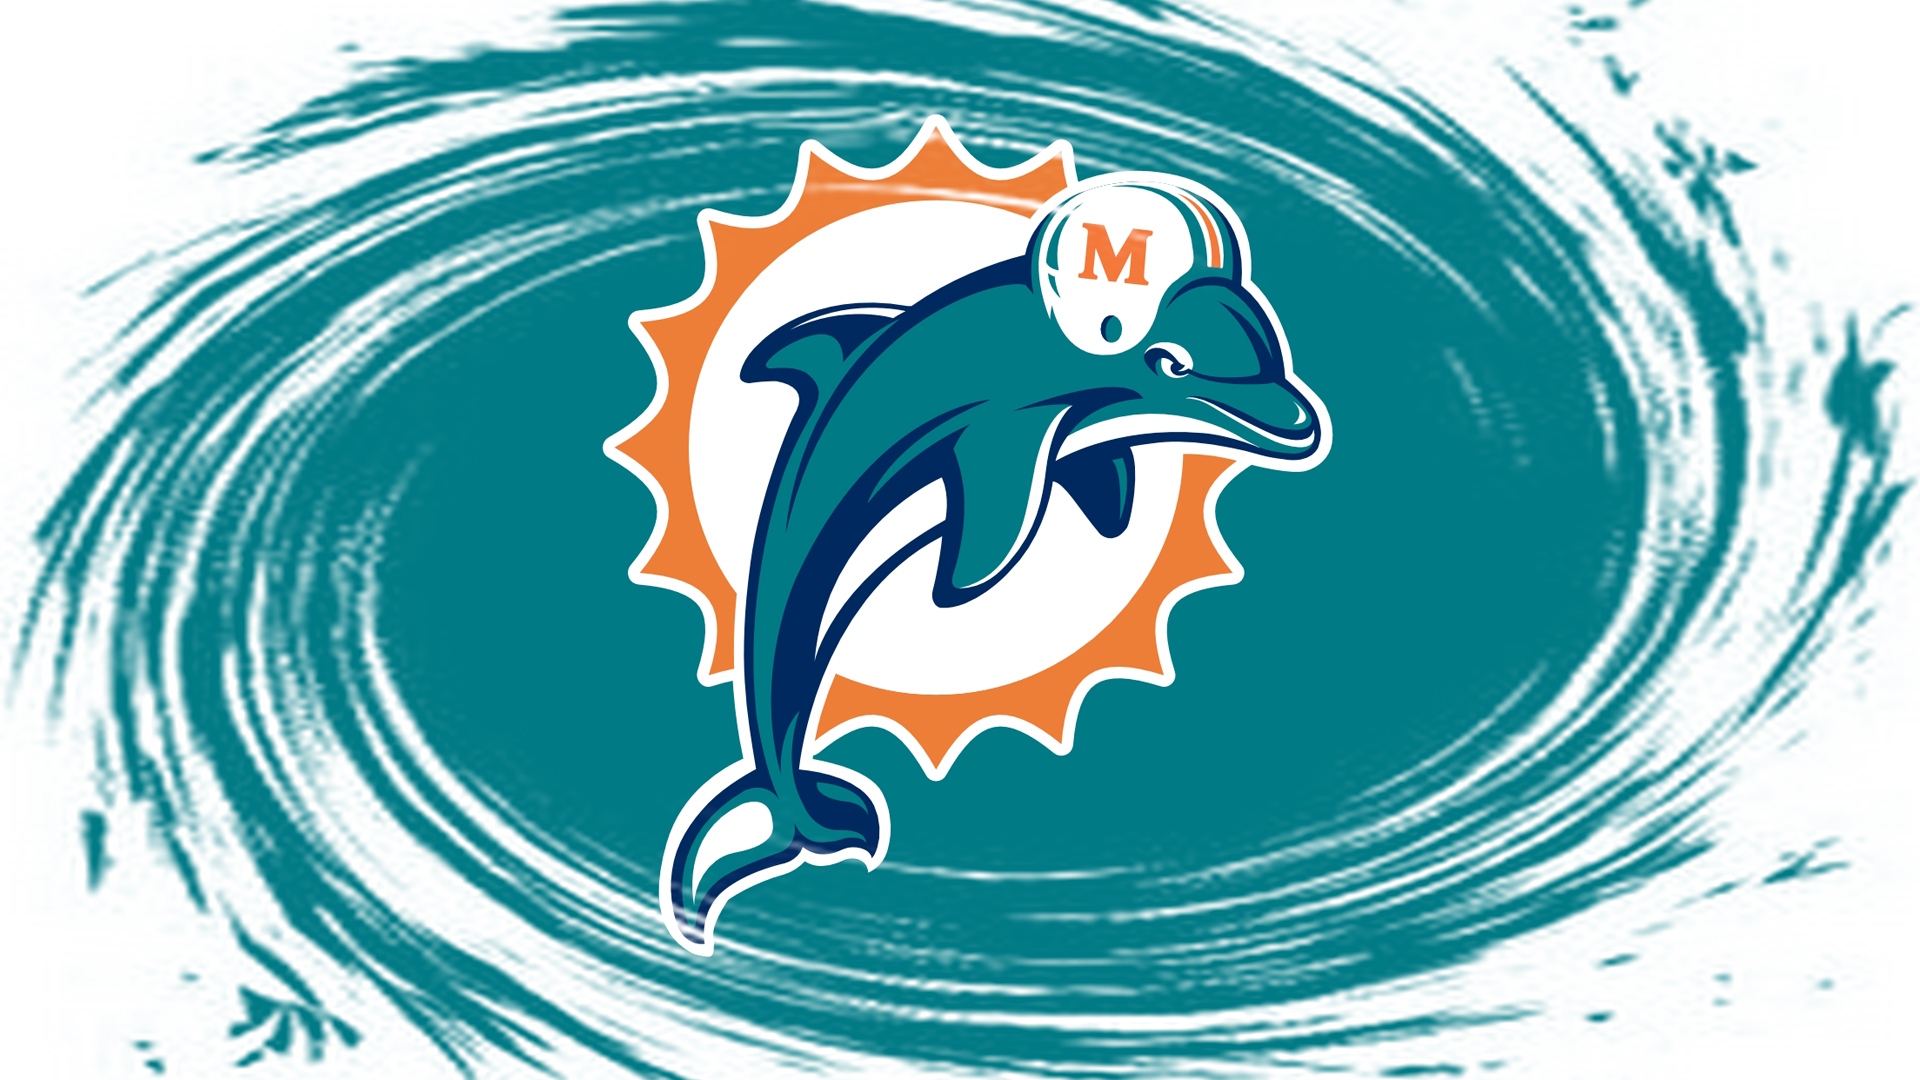 Miami Dolphins HD Image Wallpaper